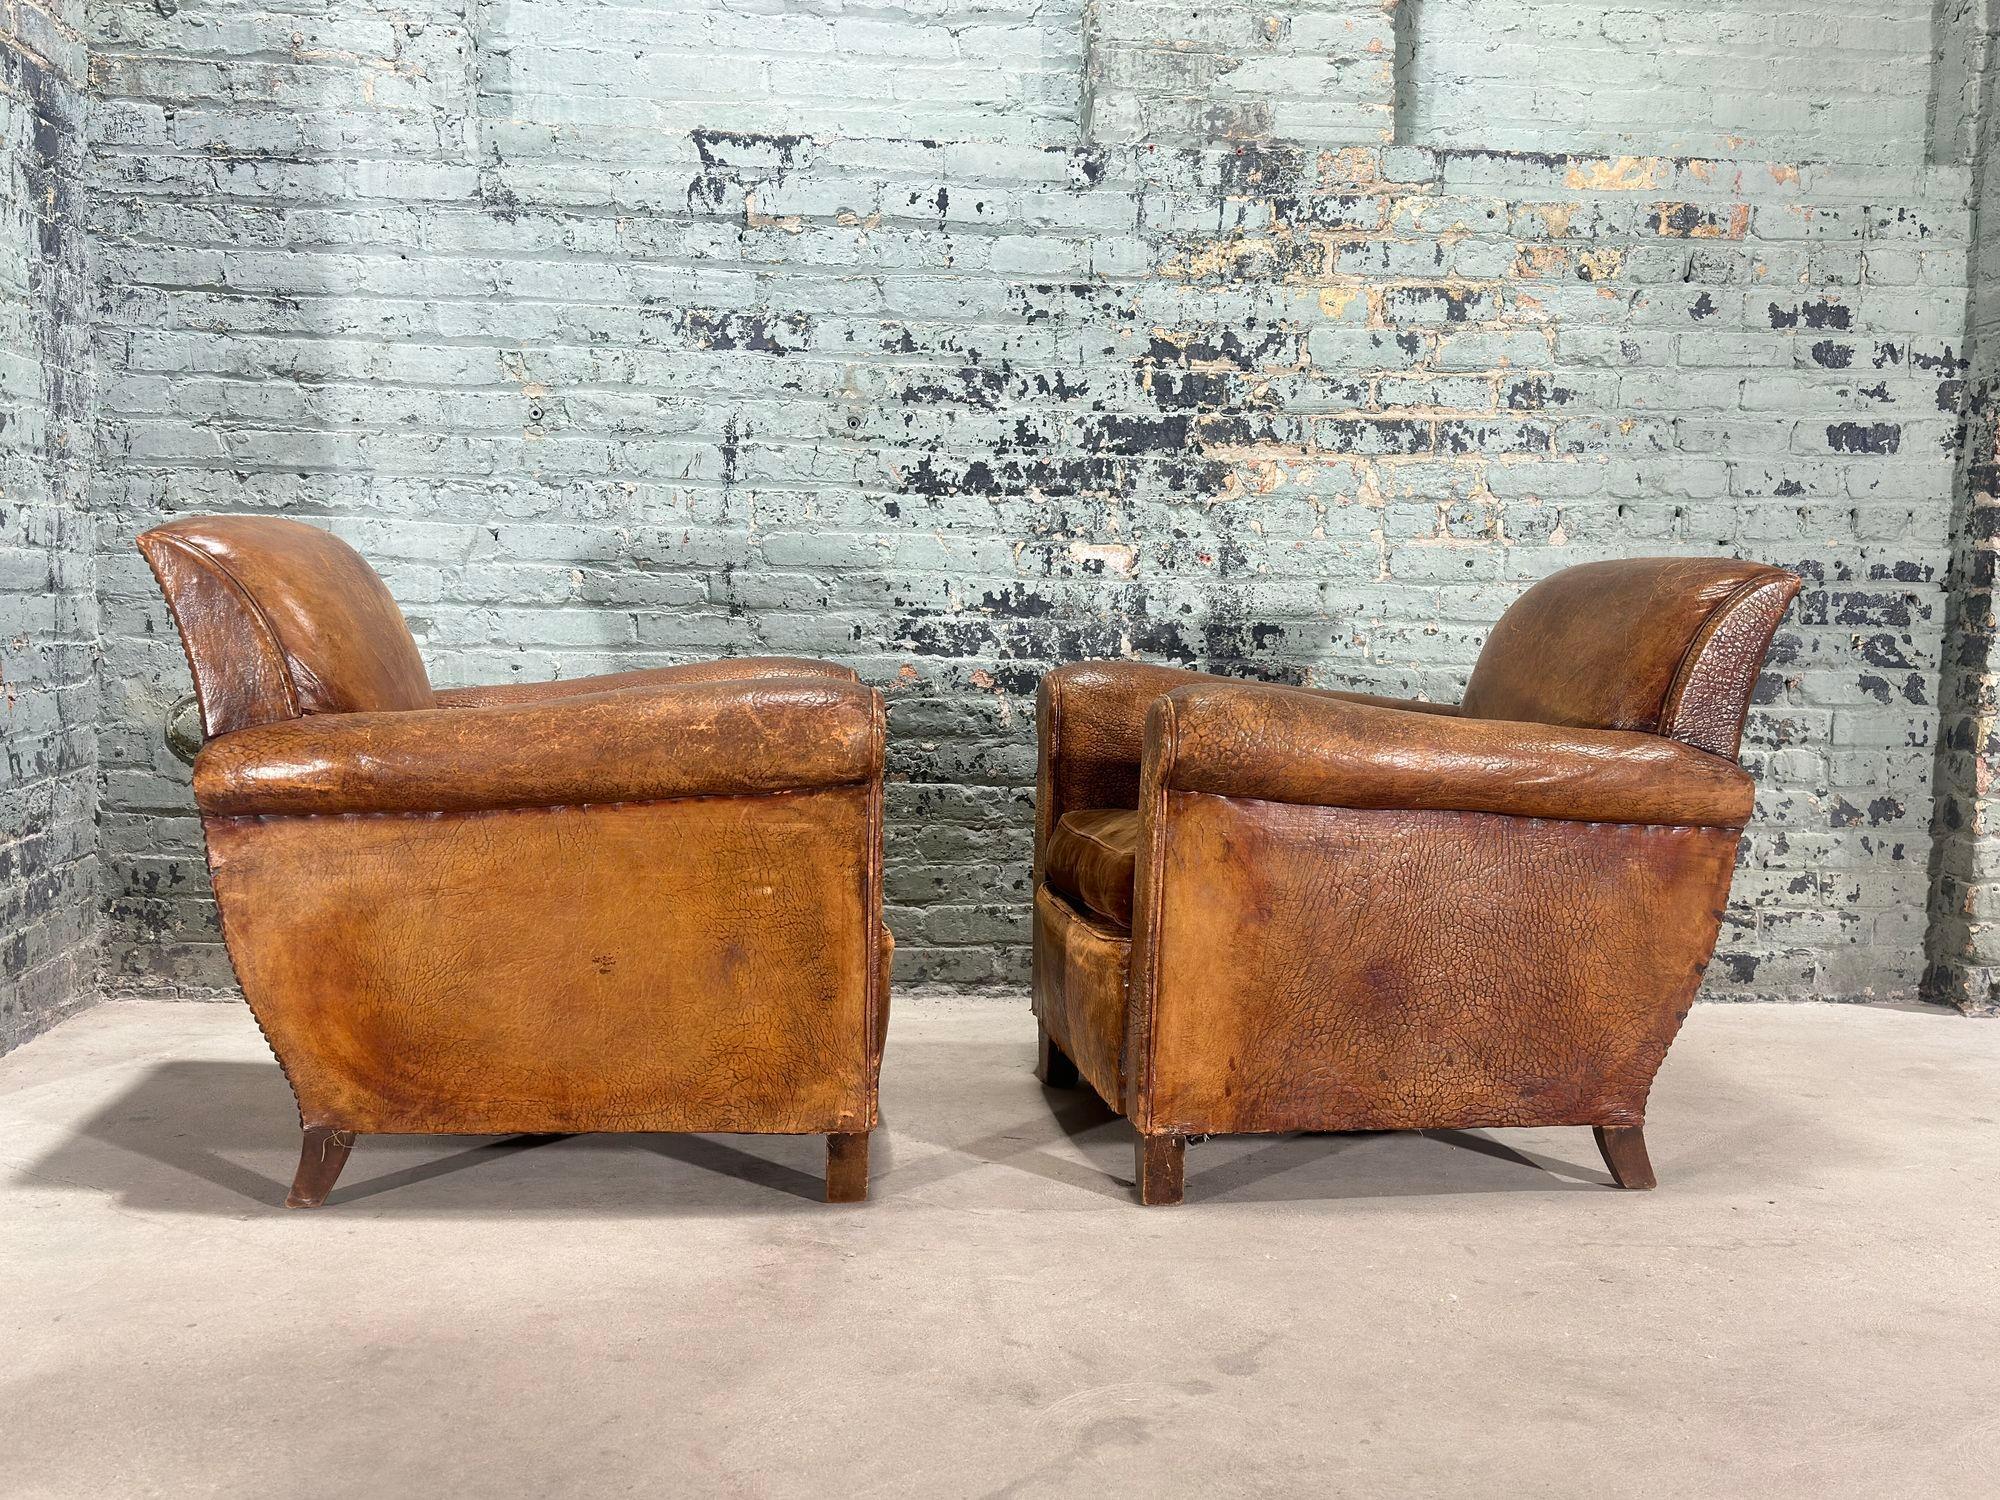 Pair French Art Deco Leather Lounge Chairs, 1930. Nicely worn original leather with beautiful patina/distressed.
Chairs measure 31